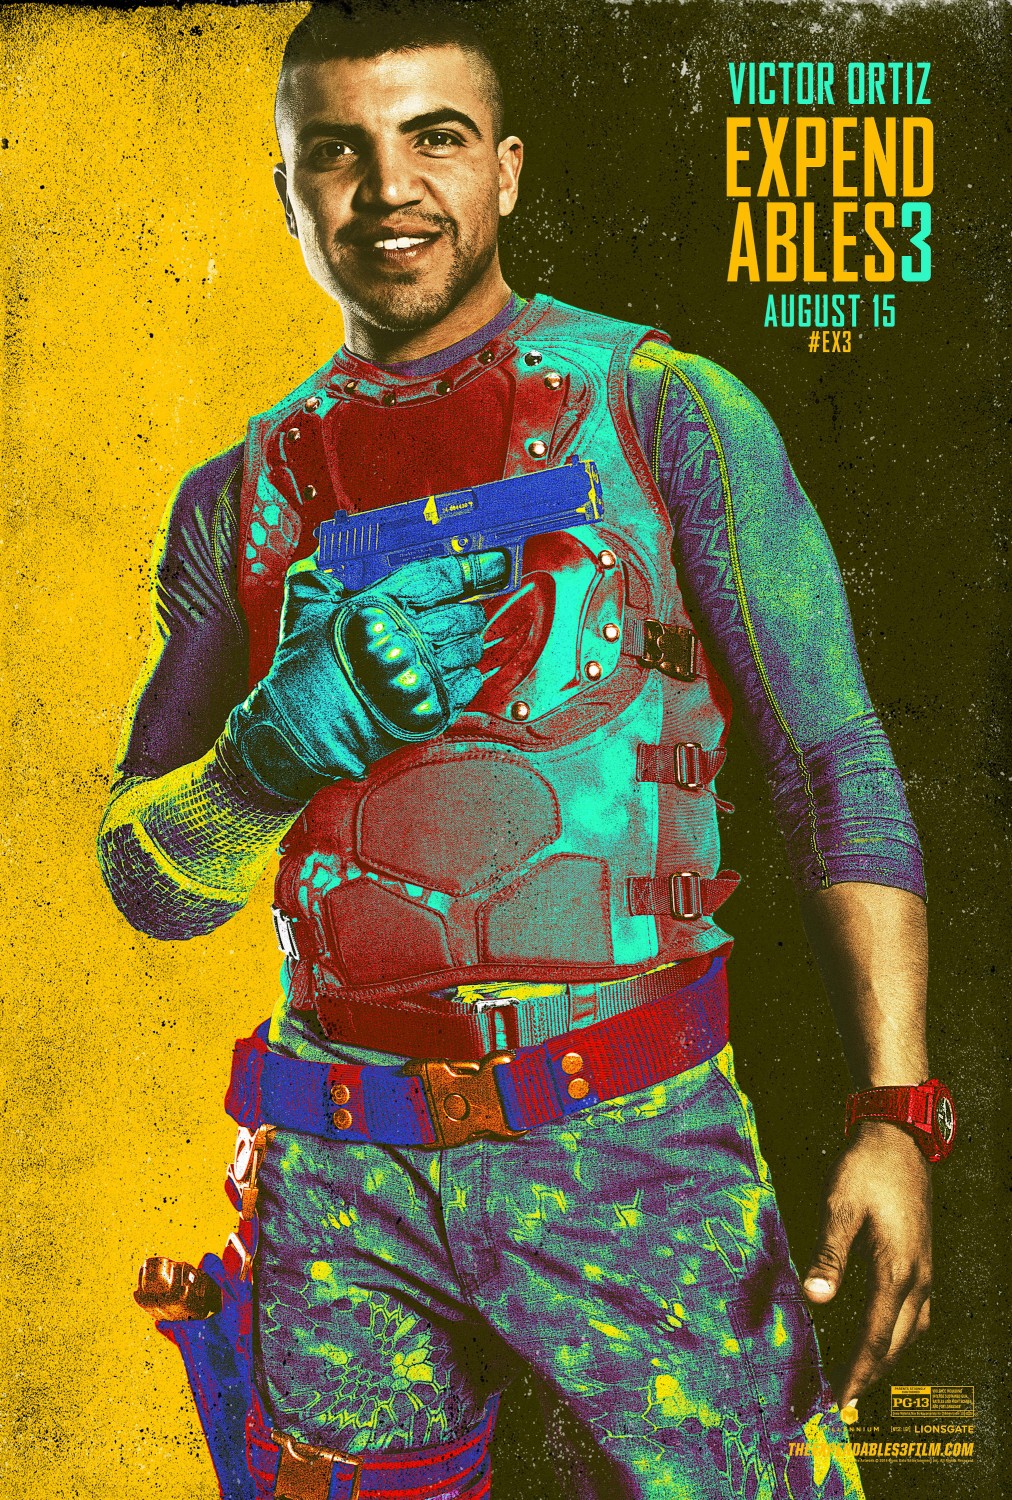 Extra Large Movie Poster Image for The Expendables 3 (#27 of 39)